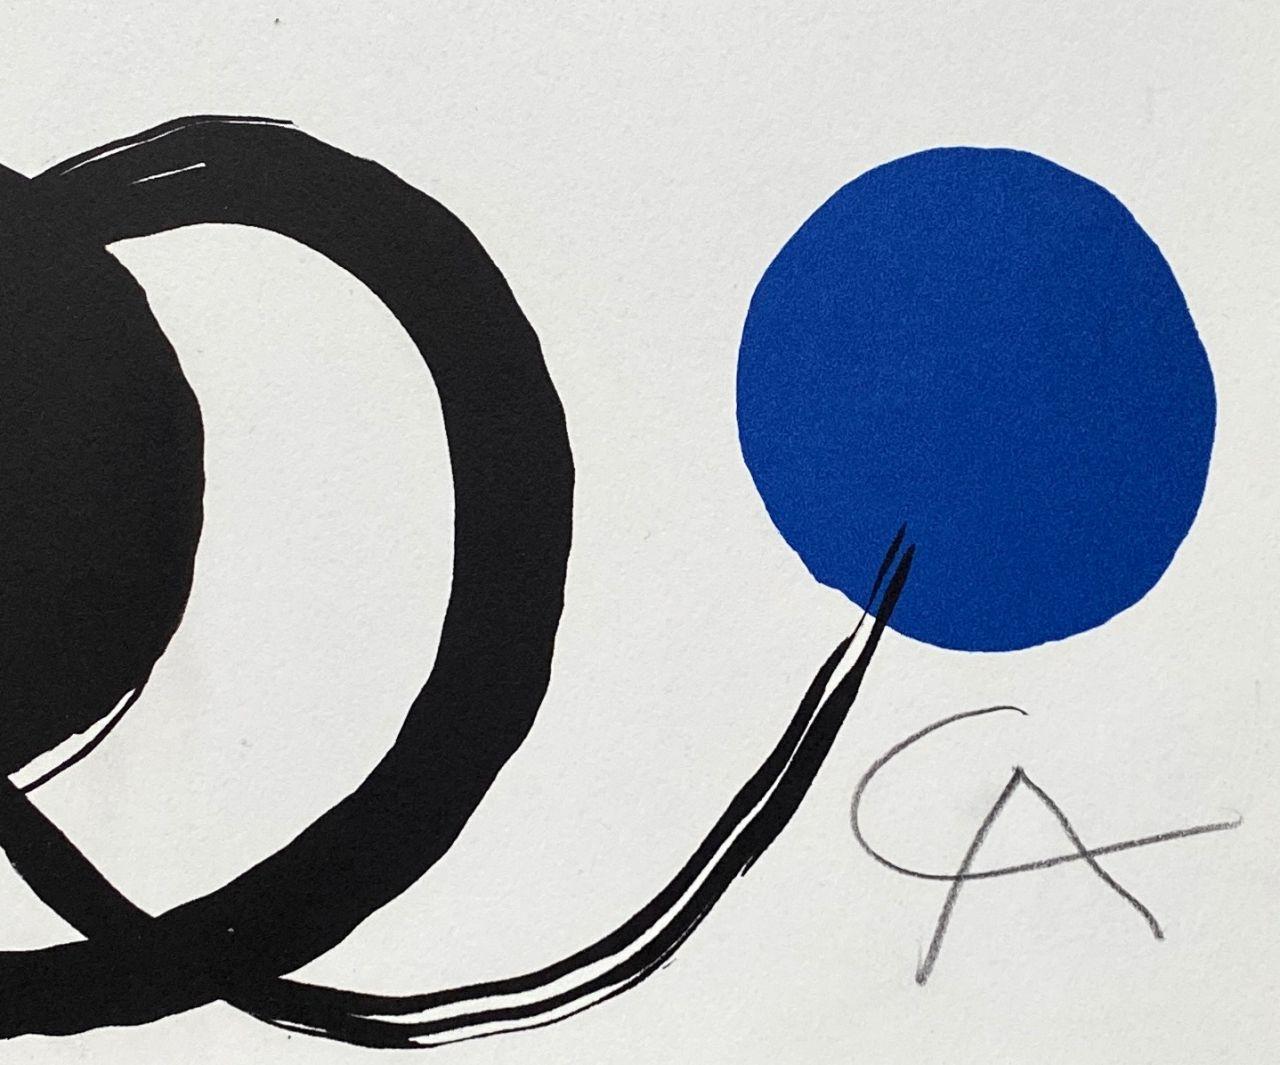 Black Spiral, Red & Blue Bubbles - Original Lithograph Hand Signed  - Gray Abstract Print by Alexander Calder